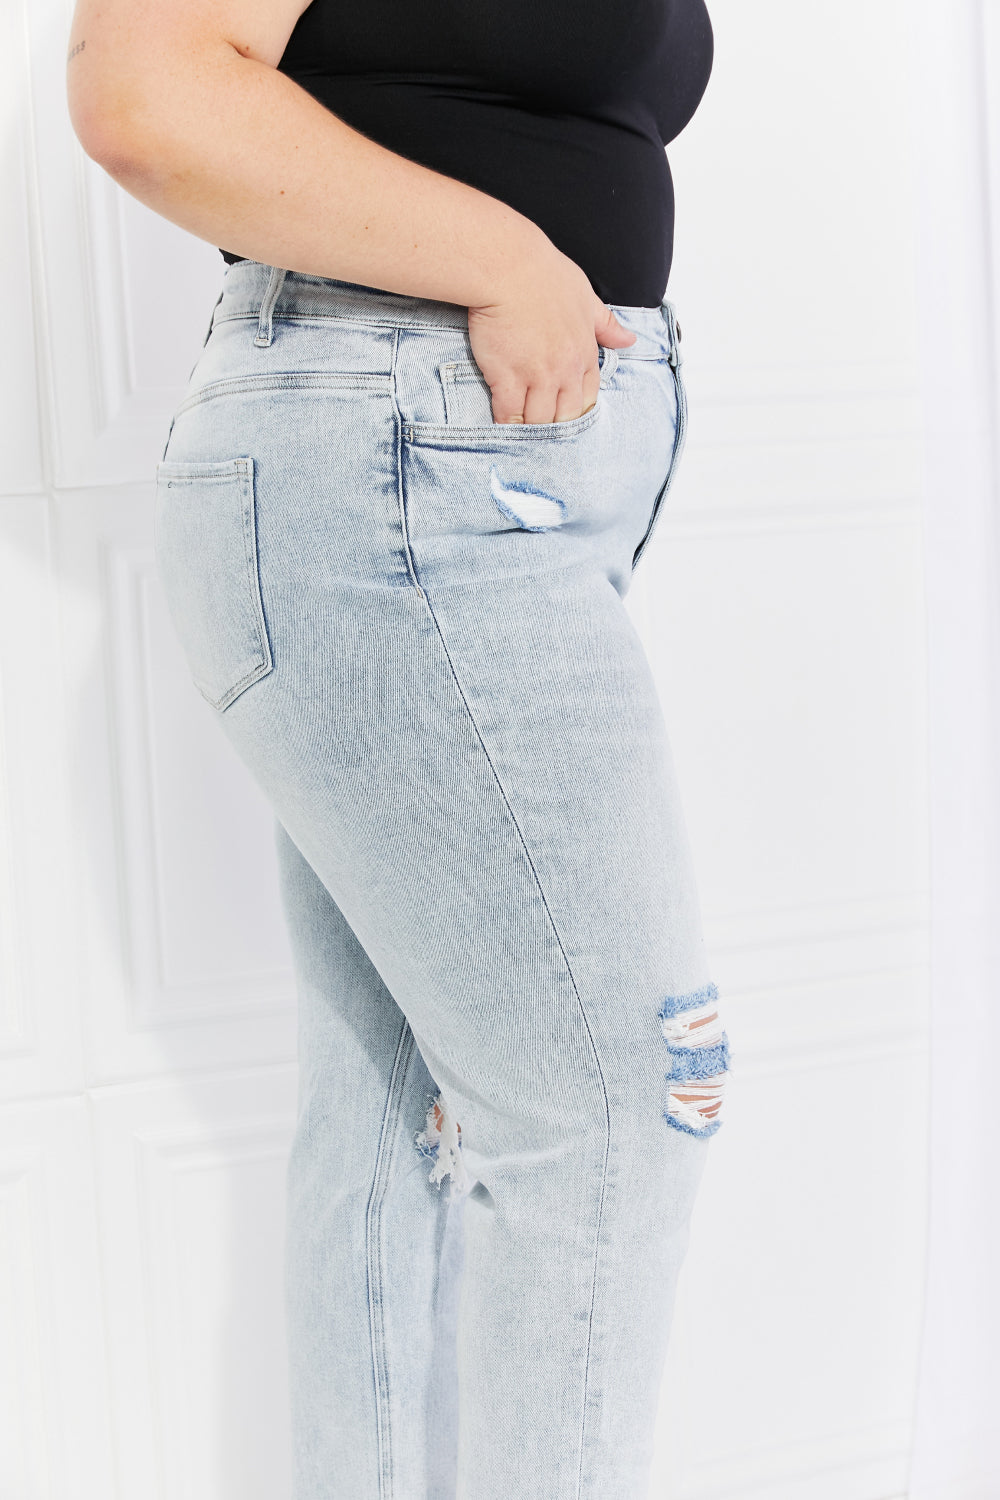 Distressed Cropped Jeans Pants